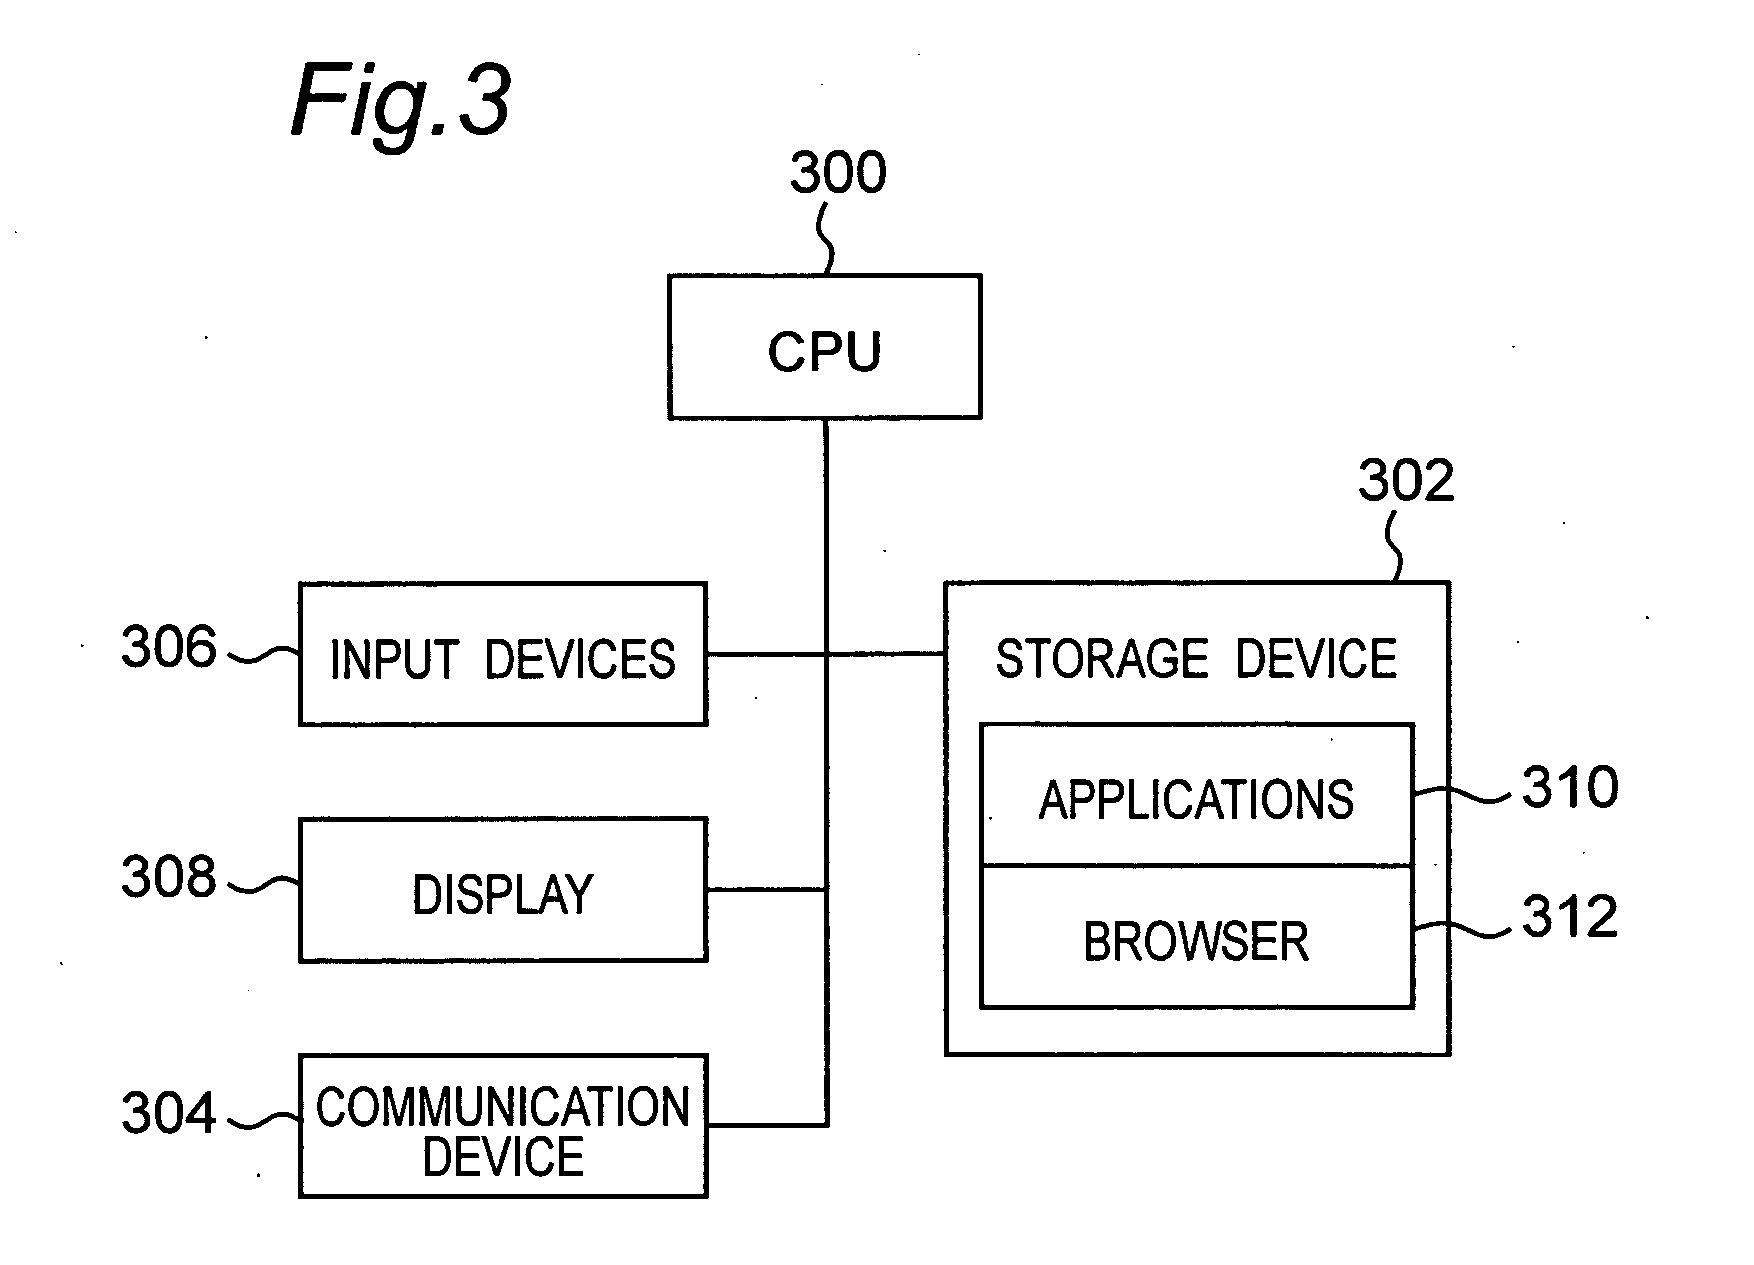 System and server for managing shared files